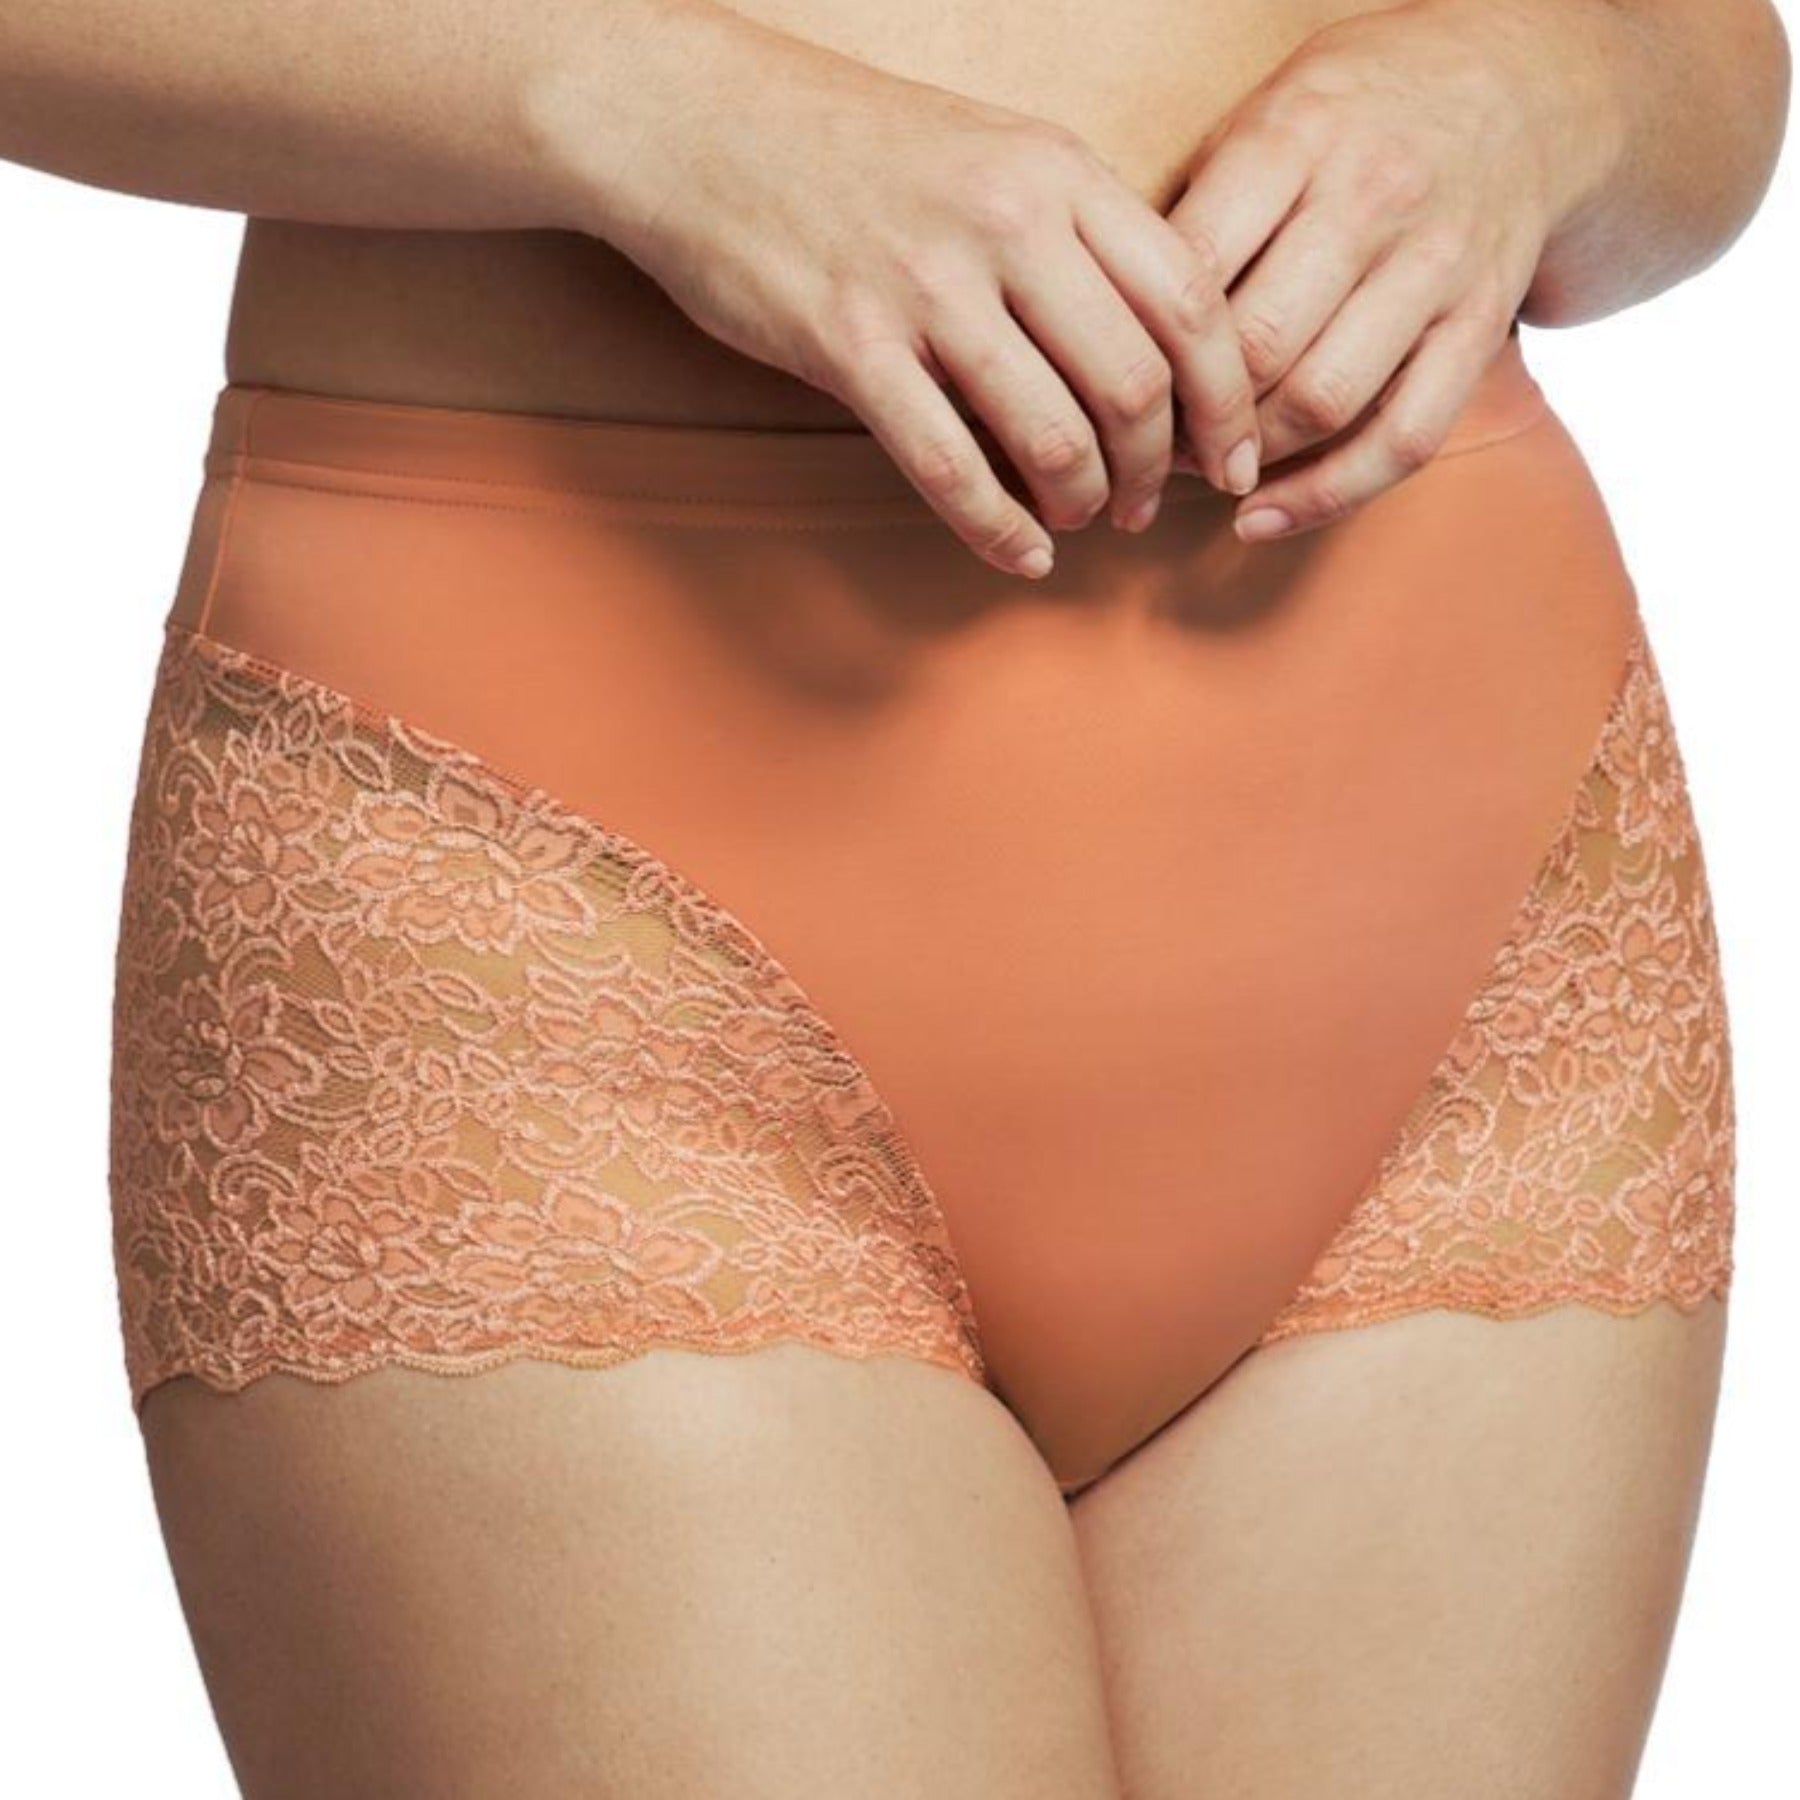 Cheeky Stretch Lace Panty 3311 - Coral